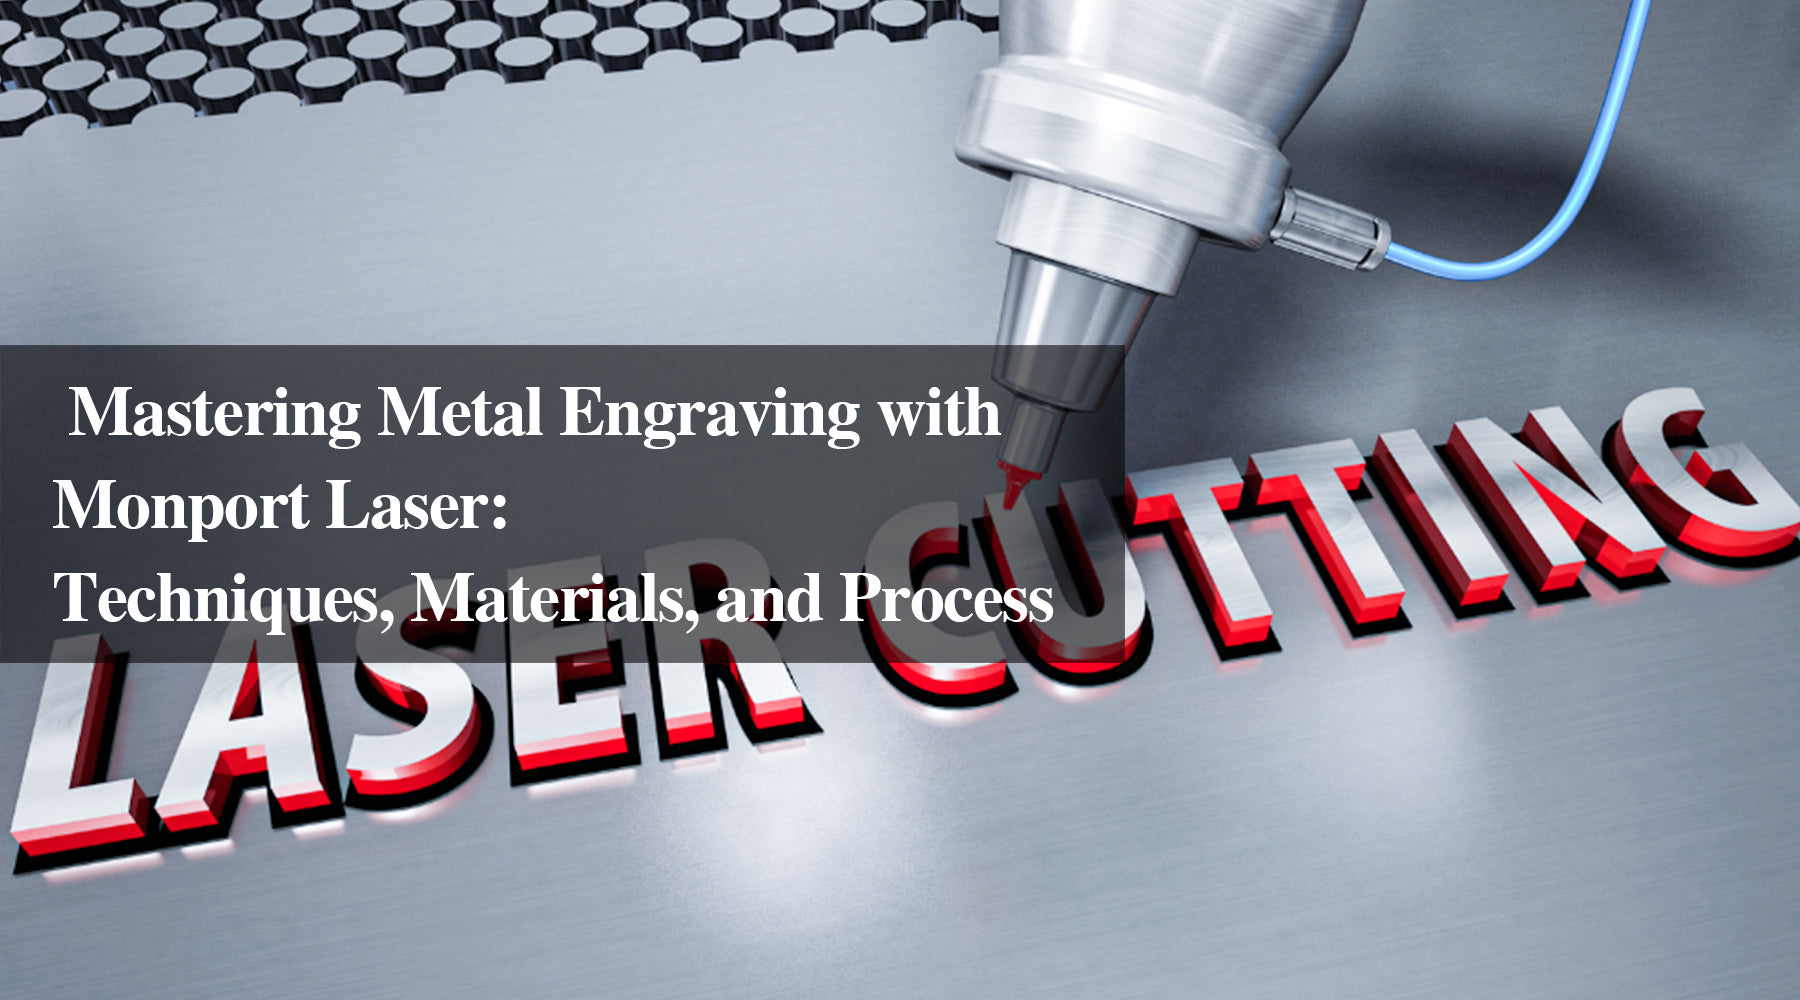 Mastering Metal Engraving with Monport Laser: Techniques, Materials, and Process